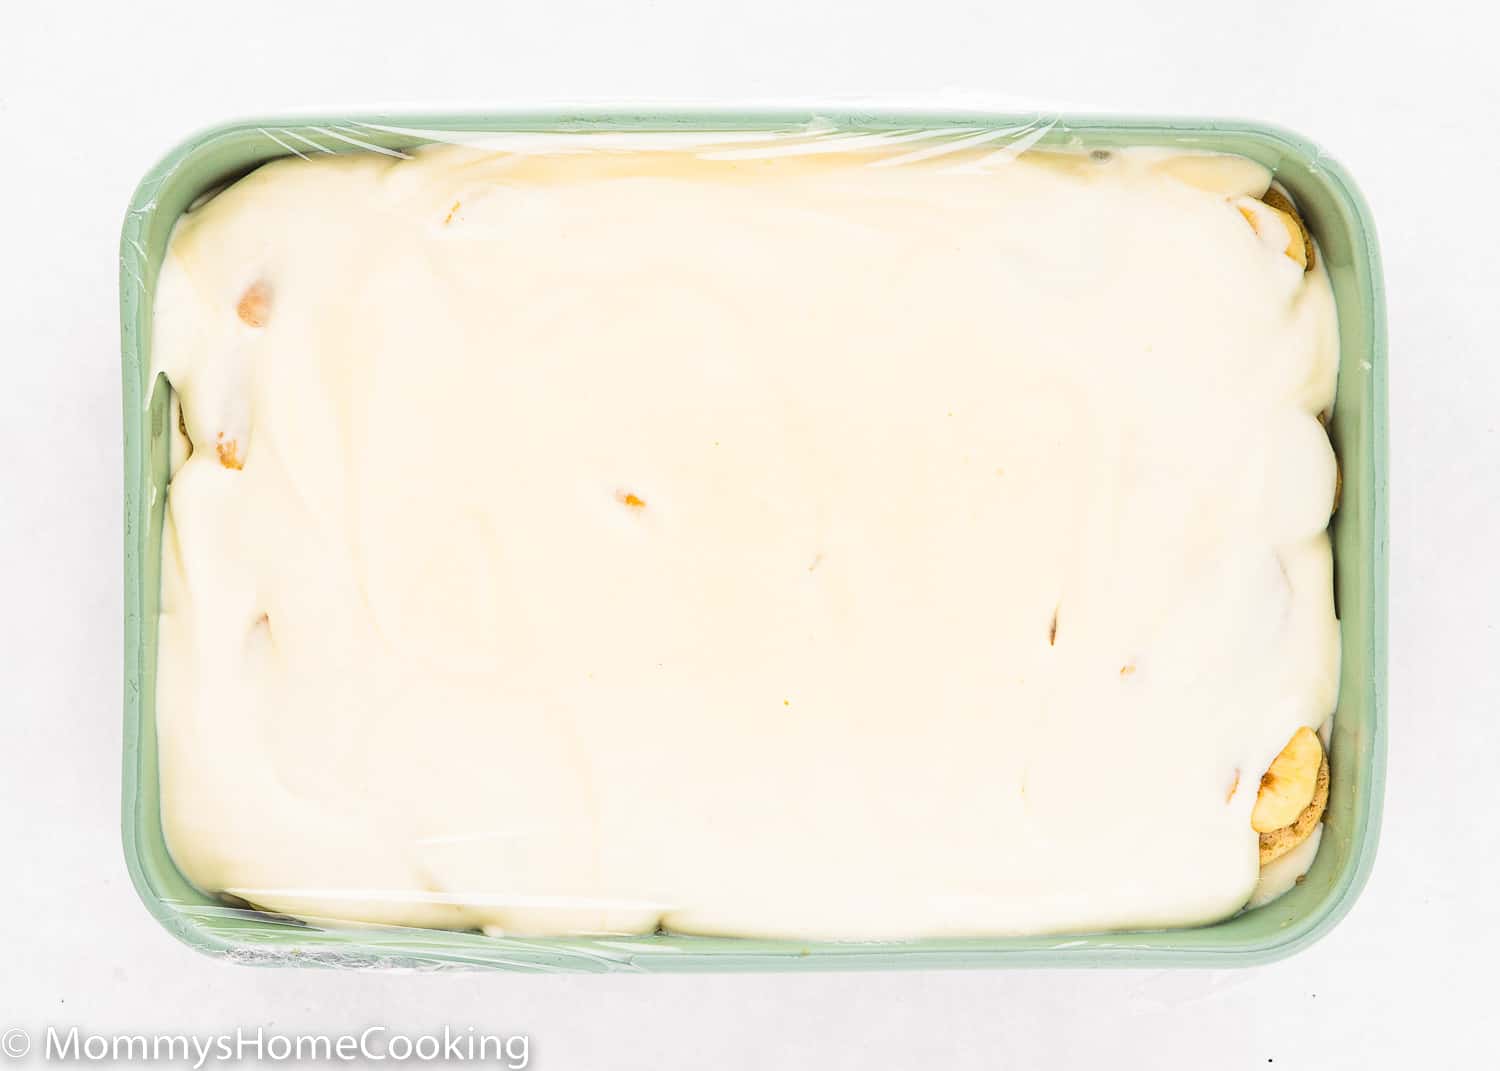 Homemade eggless banana pudding in a green rectangular dish covered with plastic wrap.